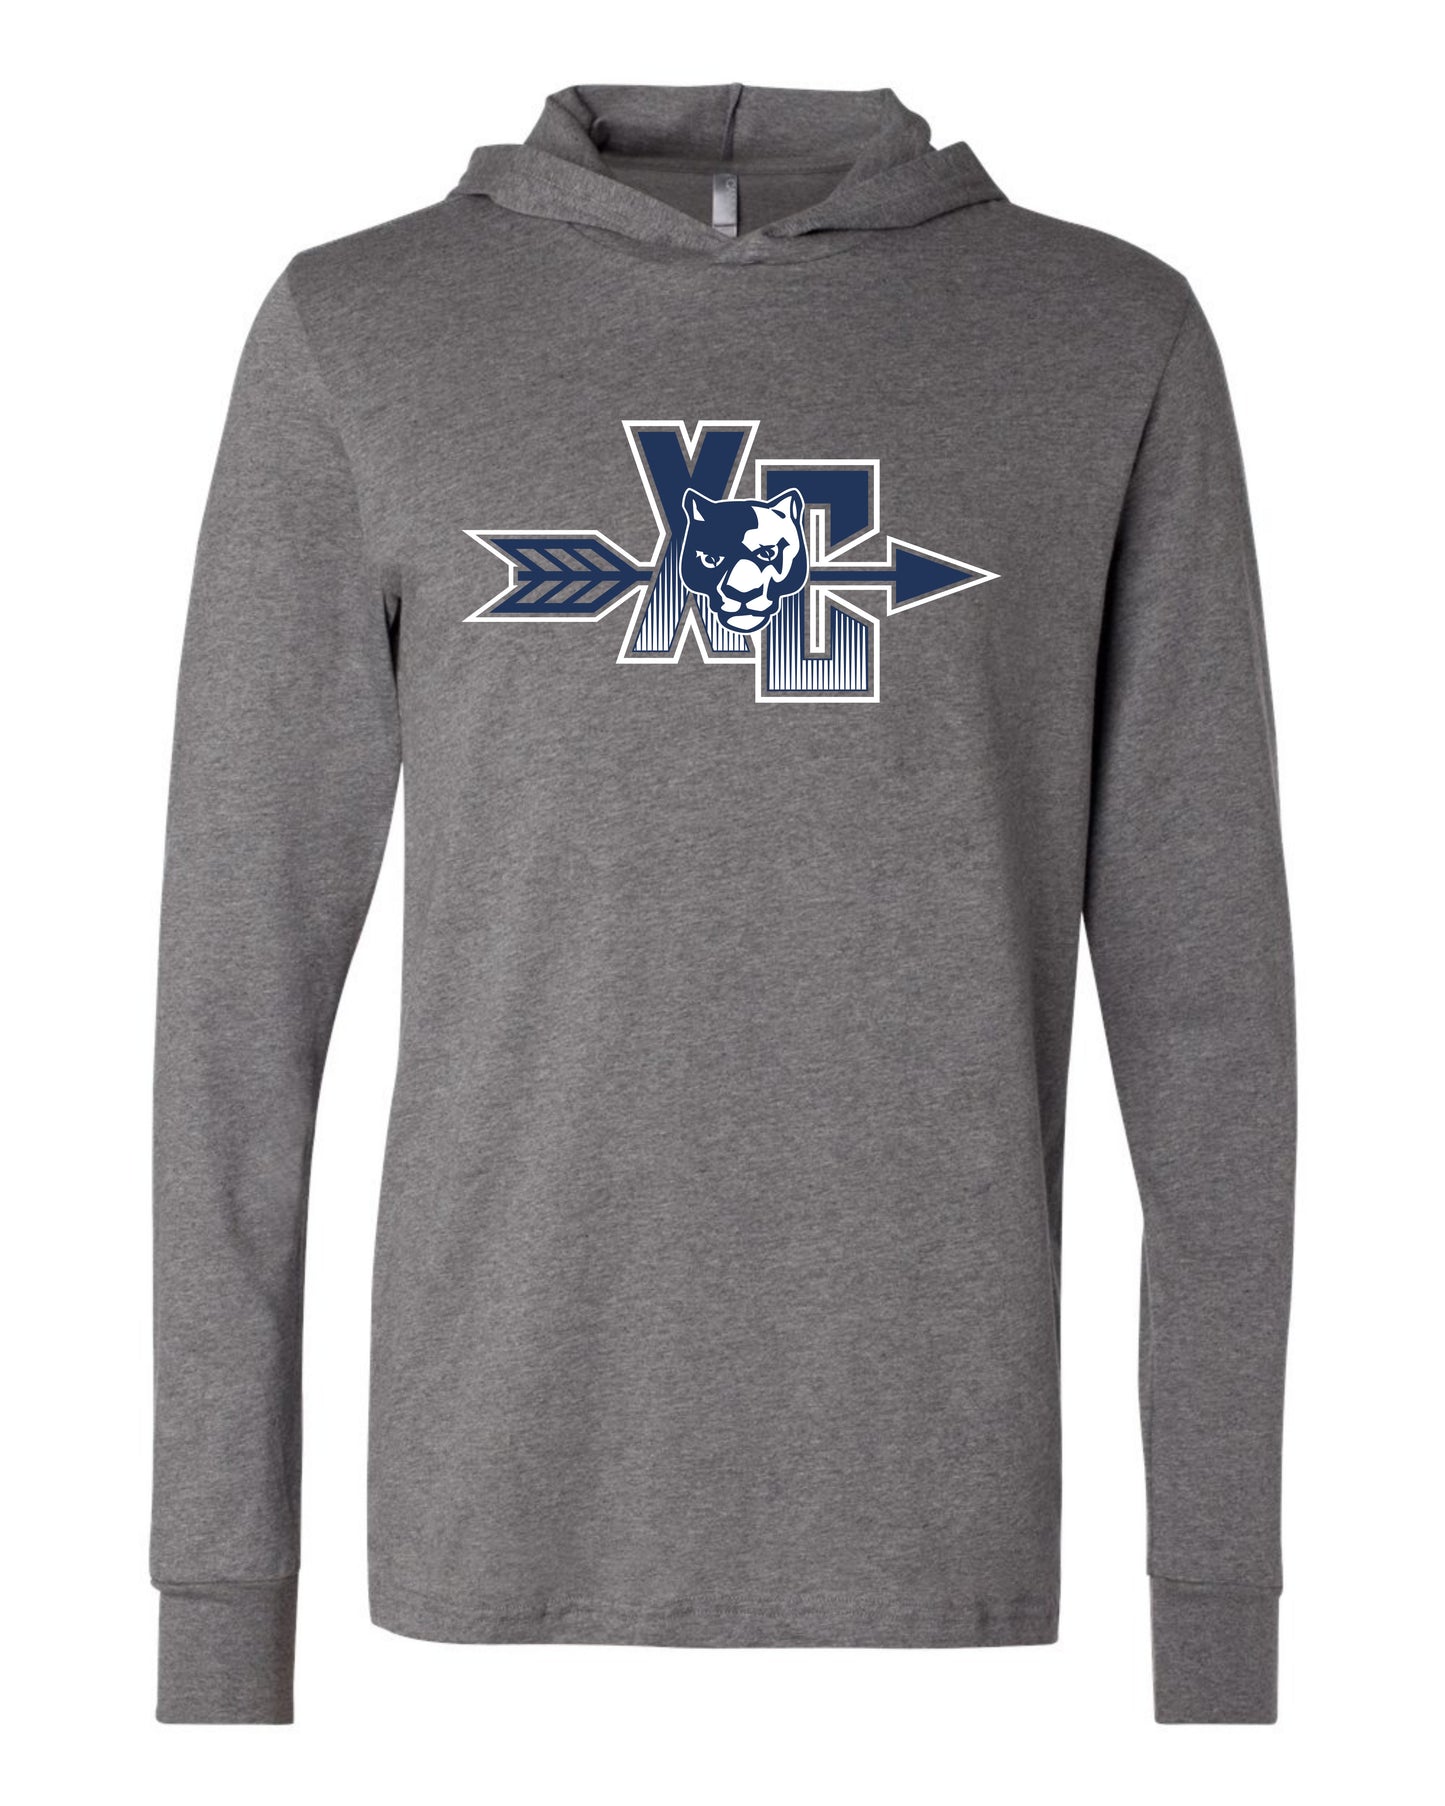 XC Panther Head - Adult Hooded Long Sleeve